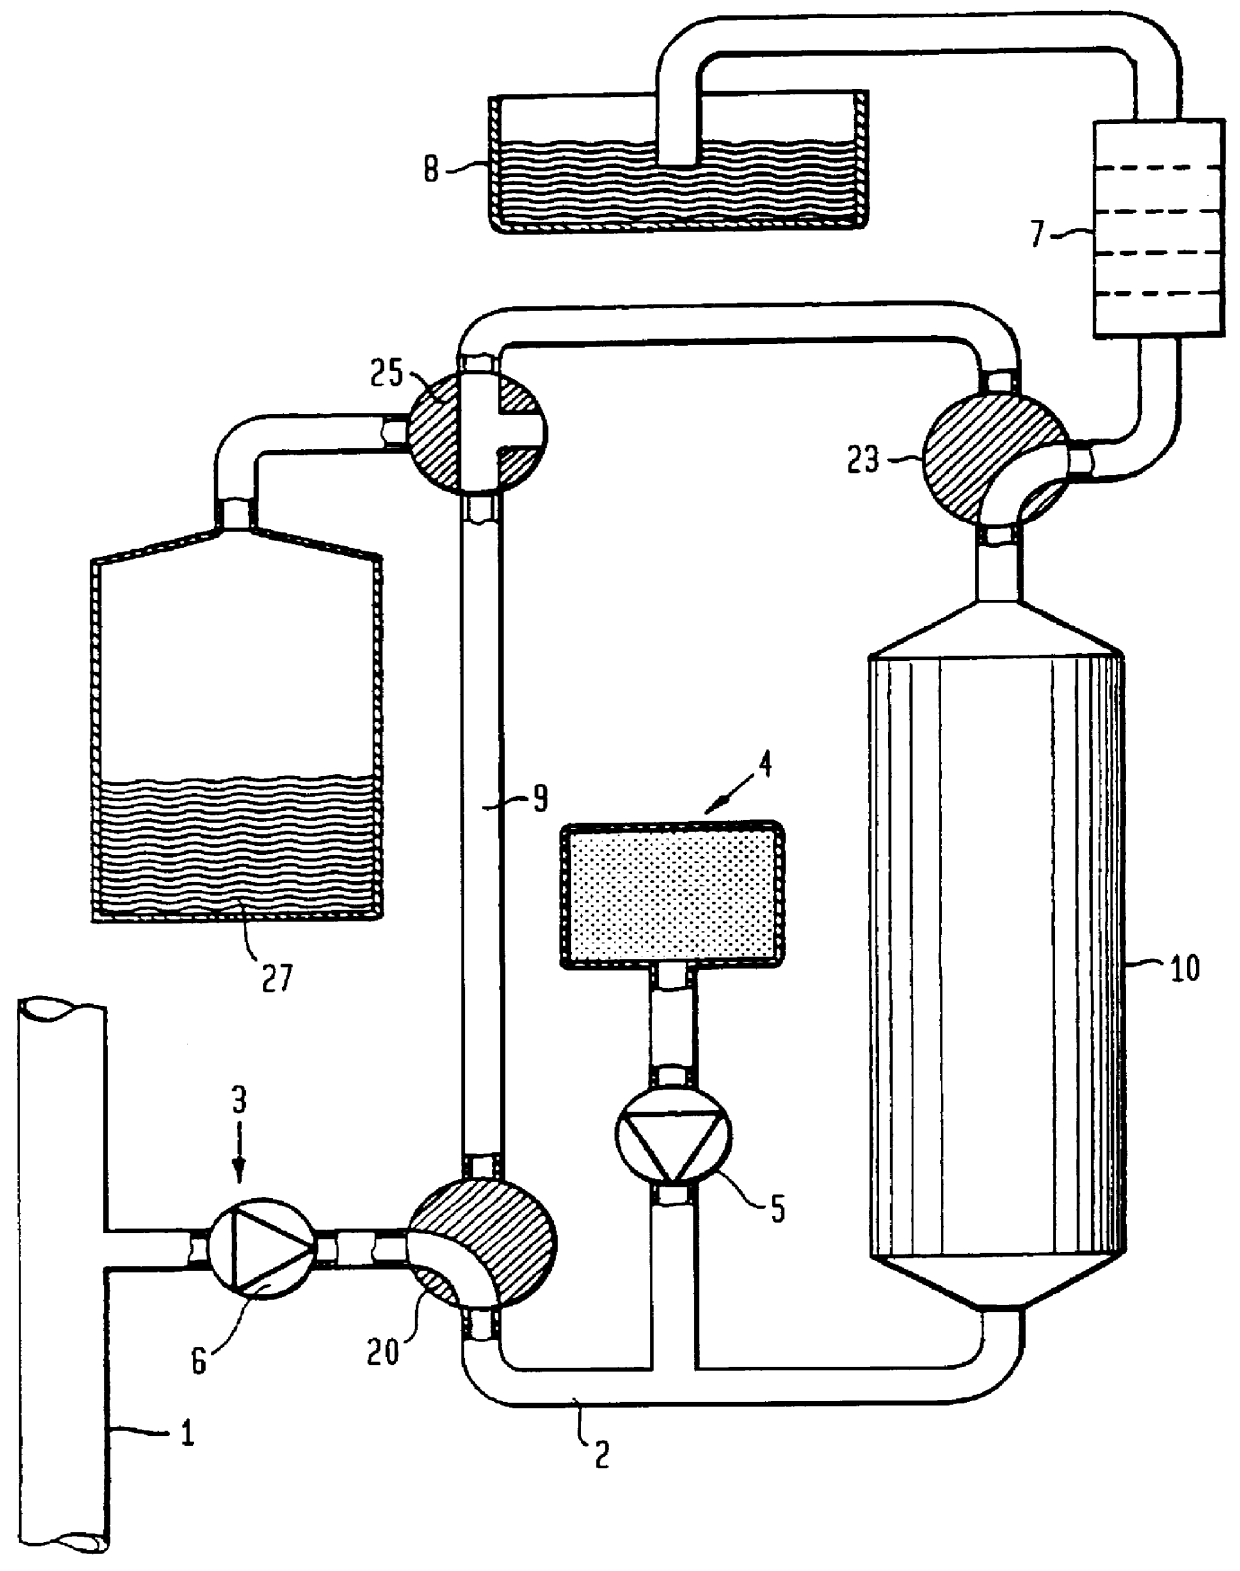 Method for measuring the concentration of a substance in a solution